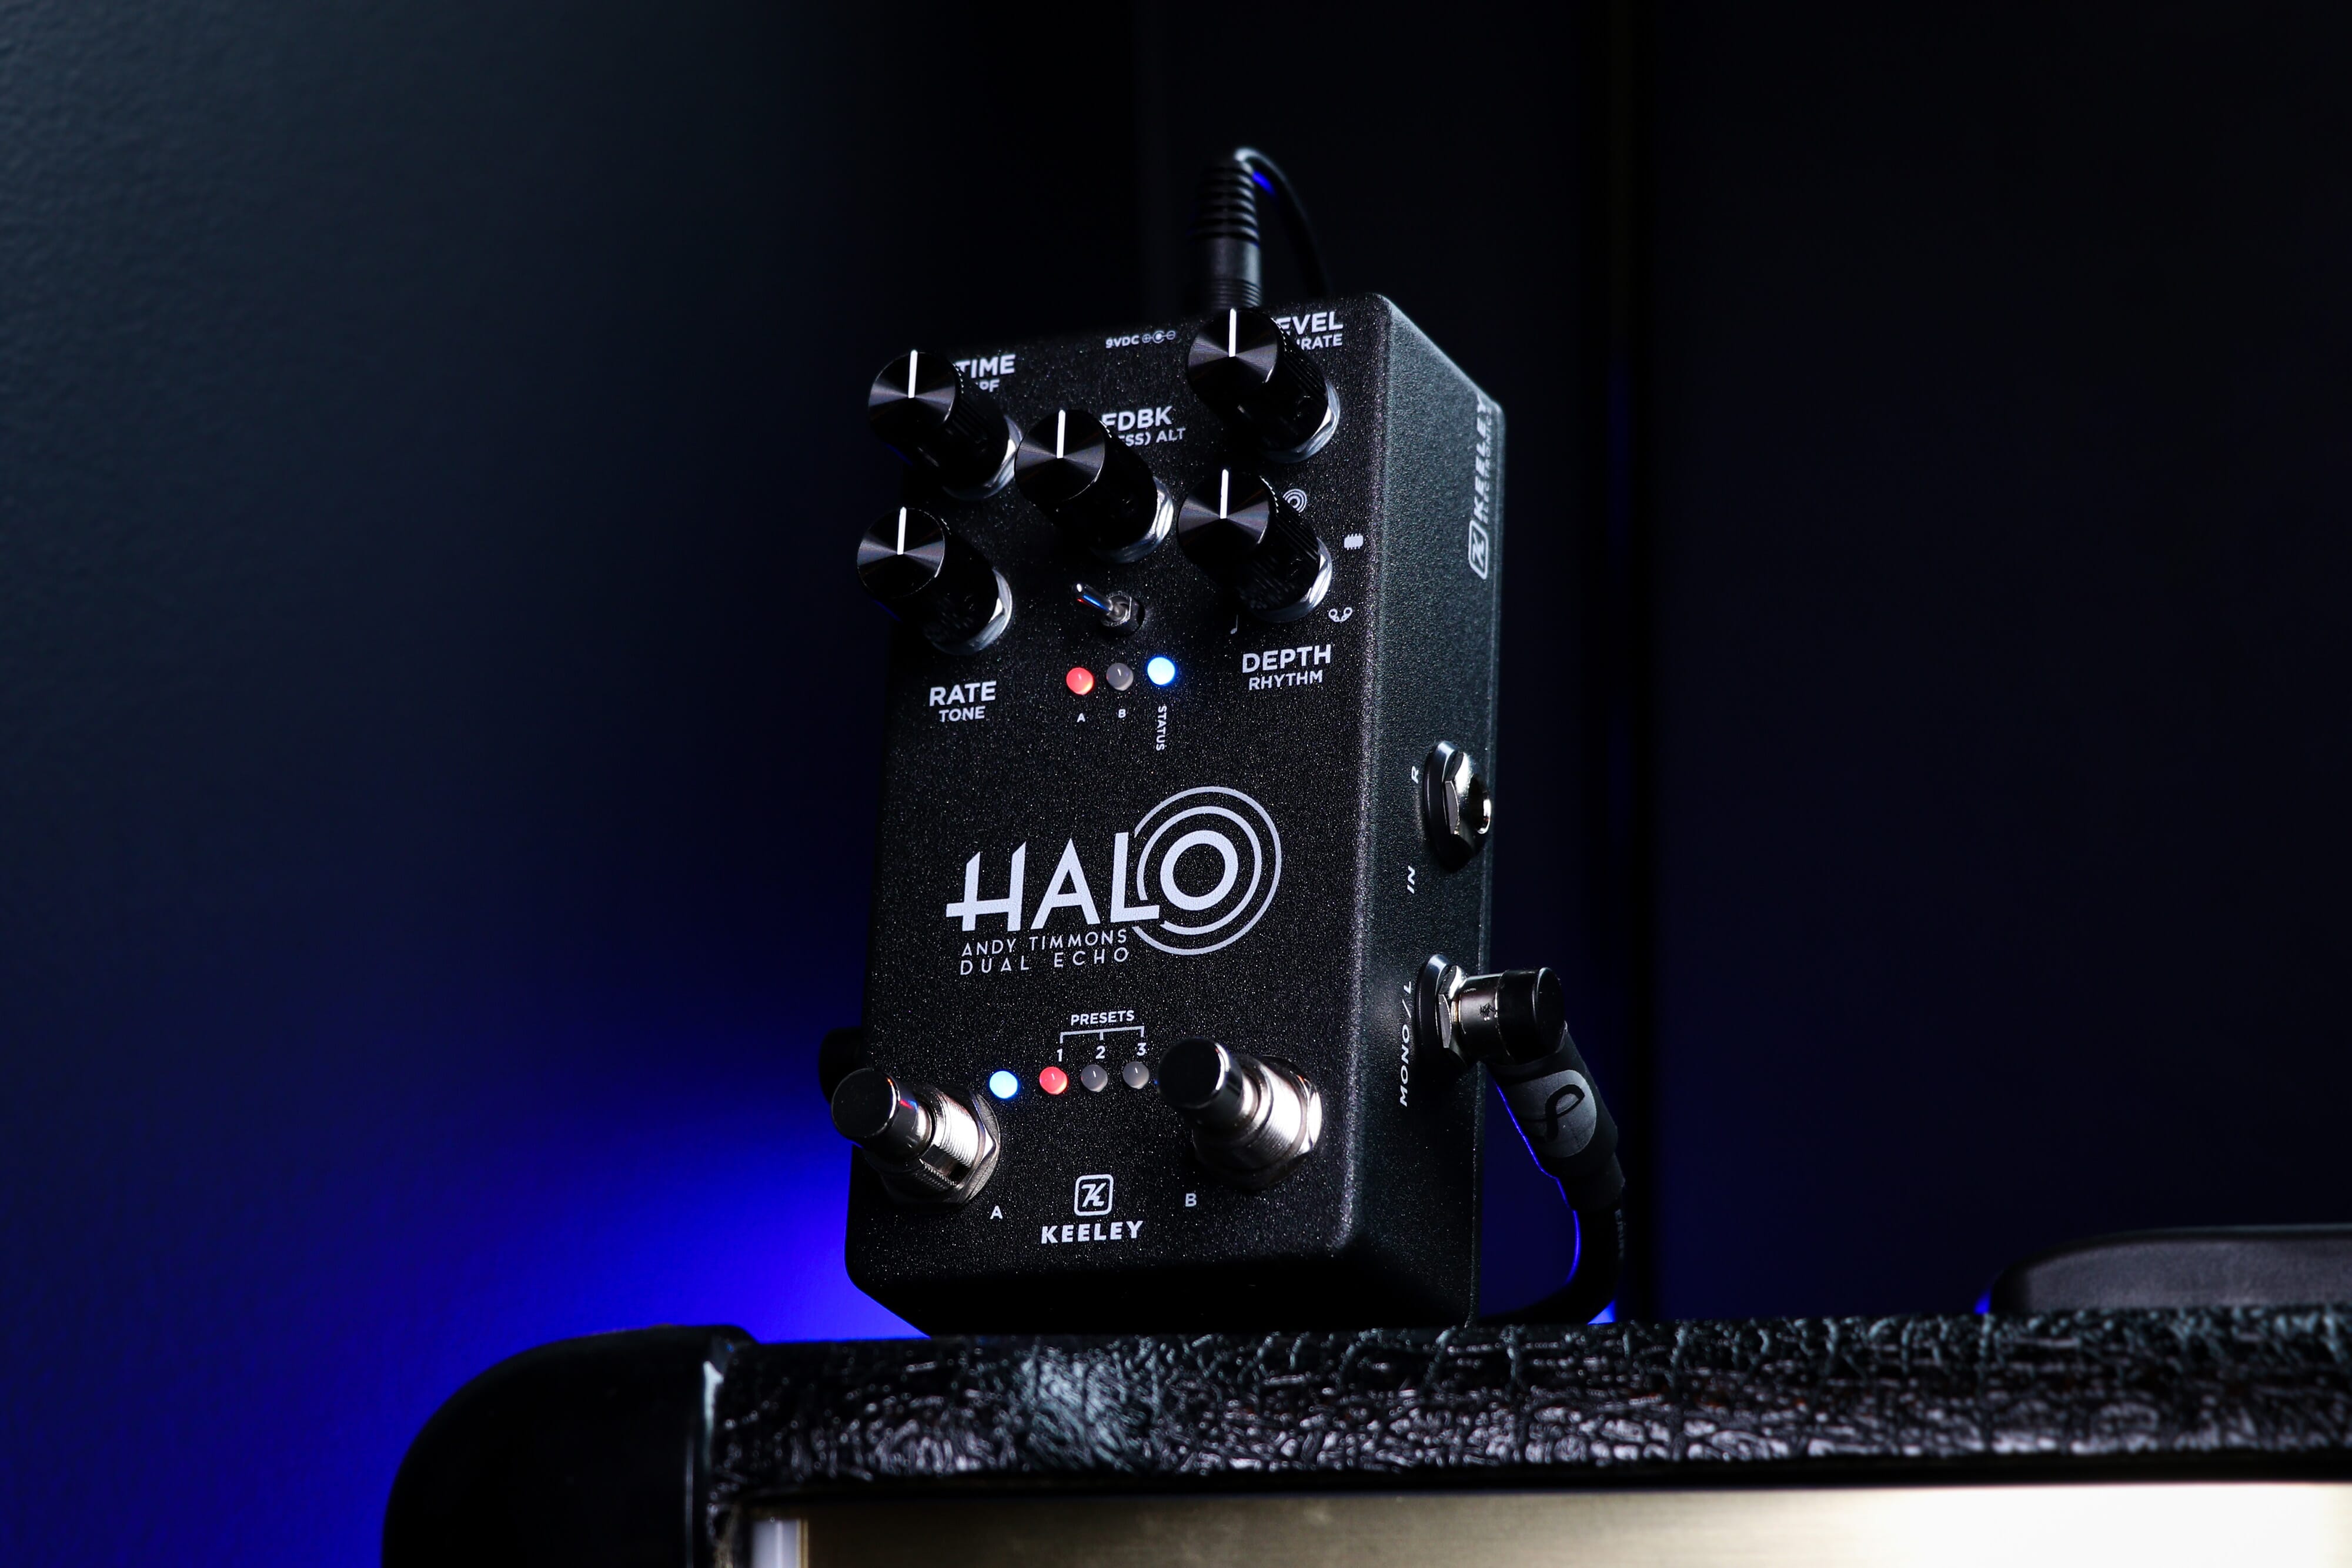 Introducing the Keeley Halo Multi Delay